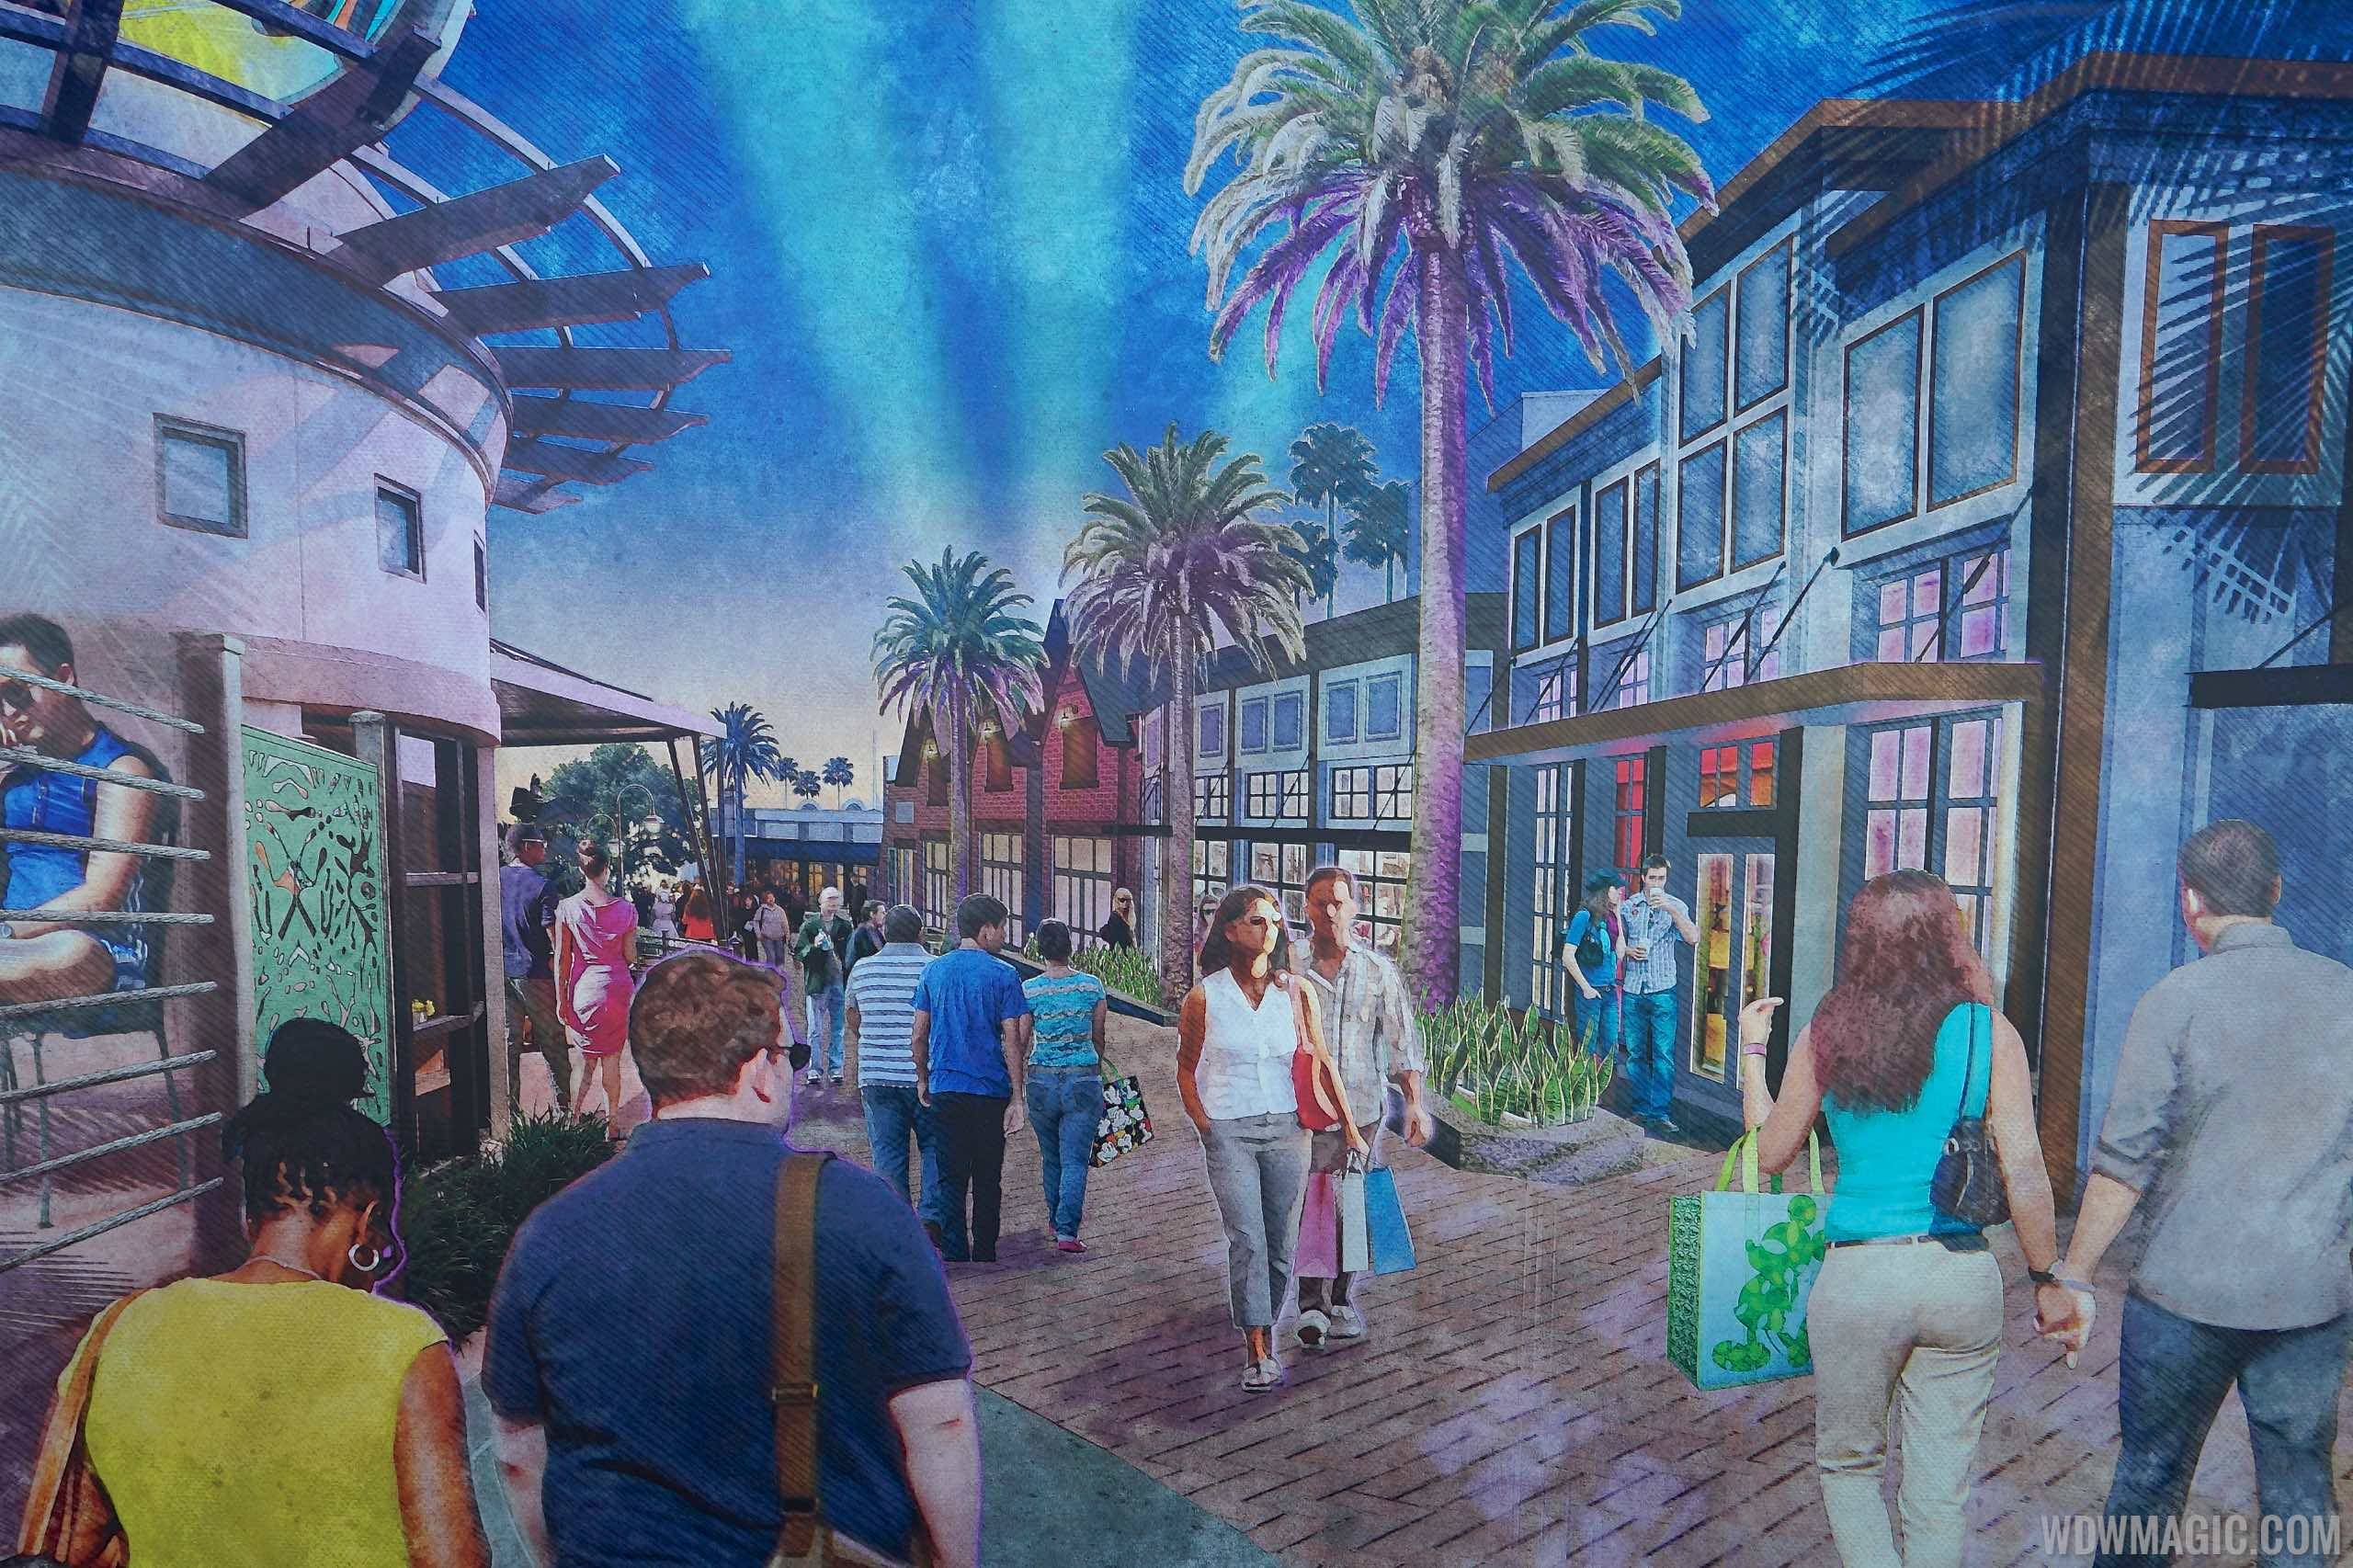 PHOTOS - New concept art shows more of The Landing at Disney Springs